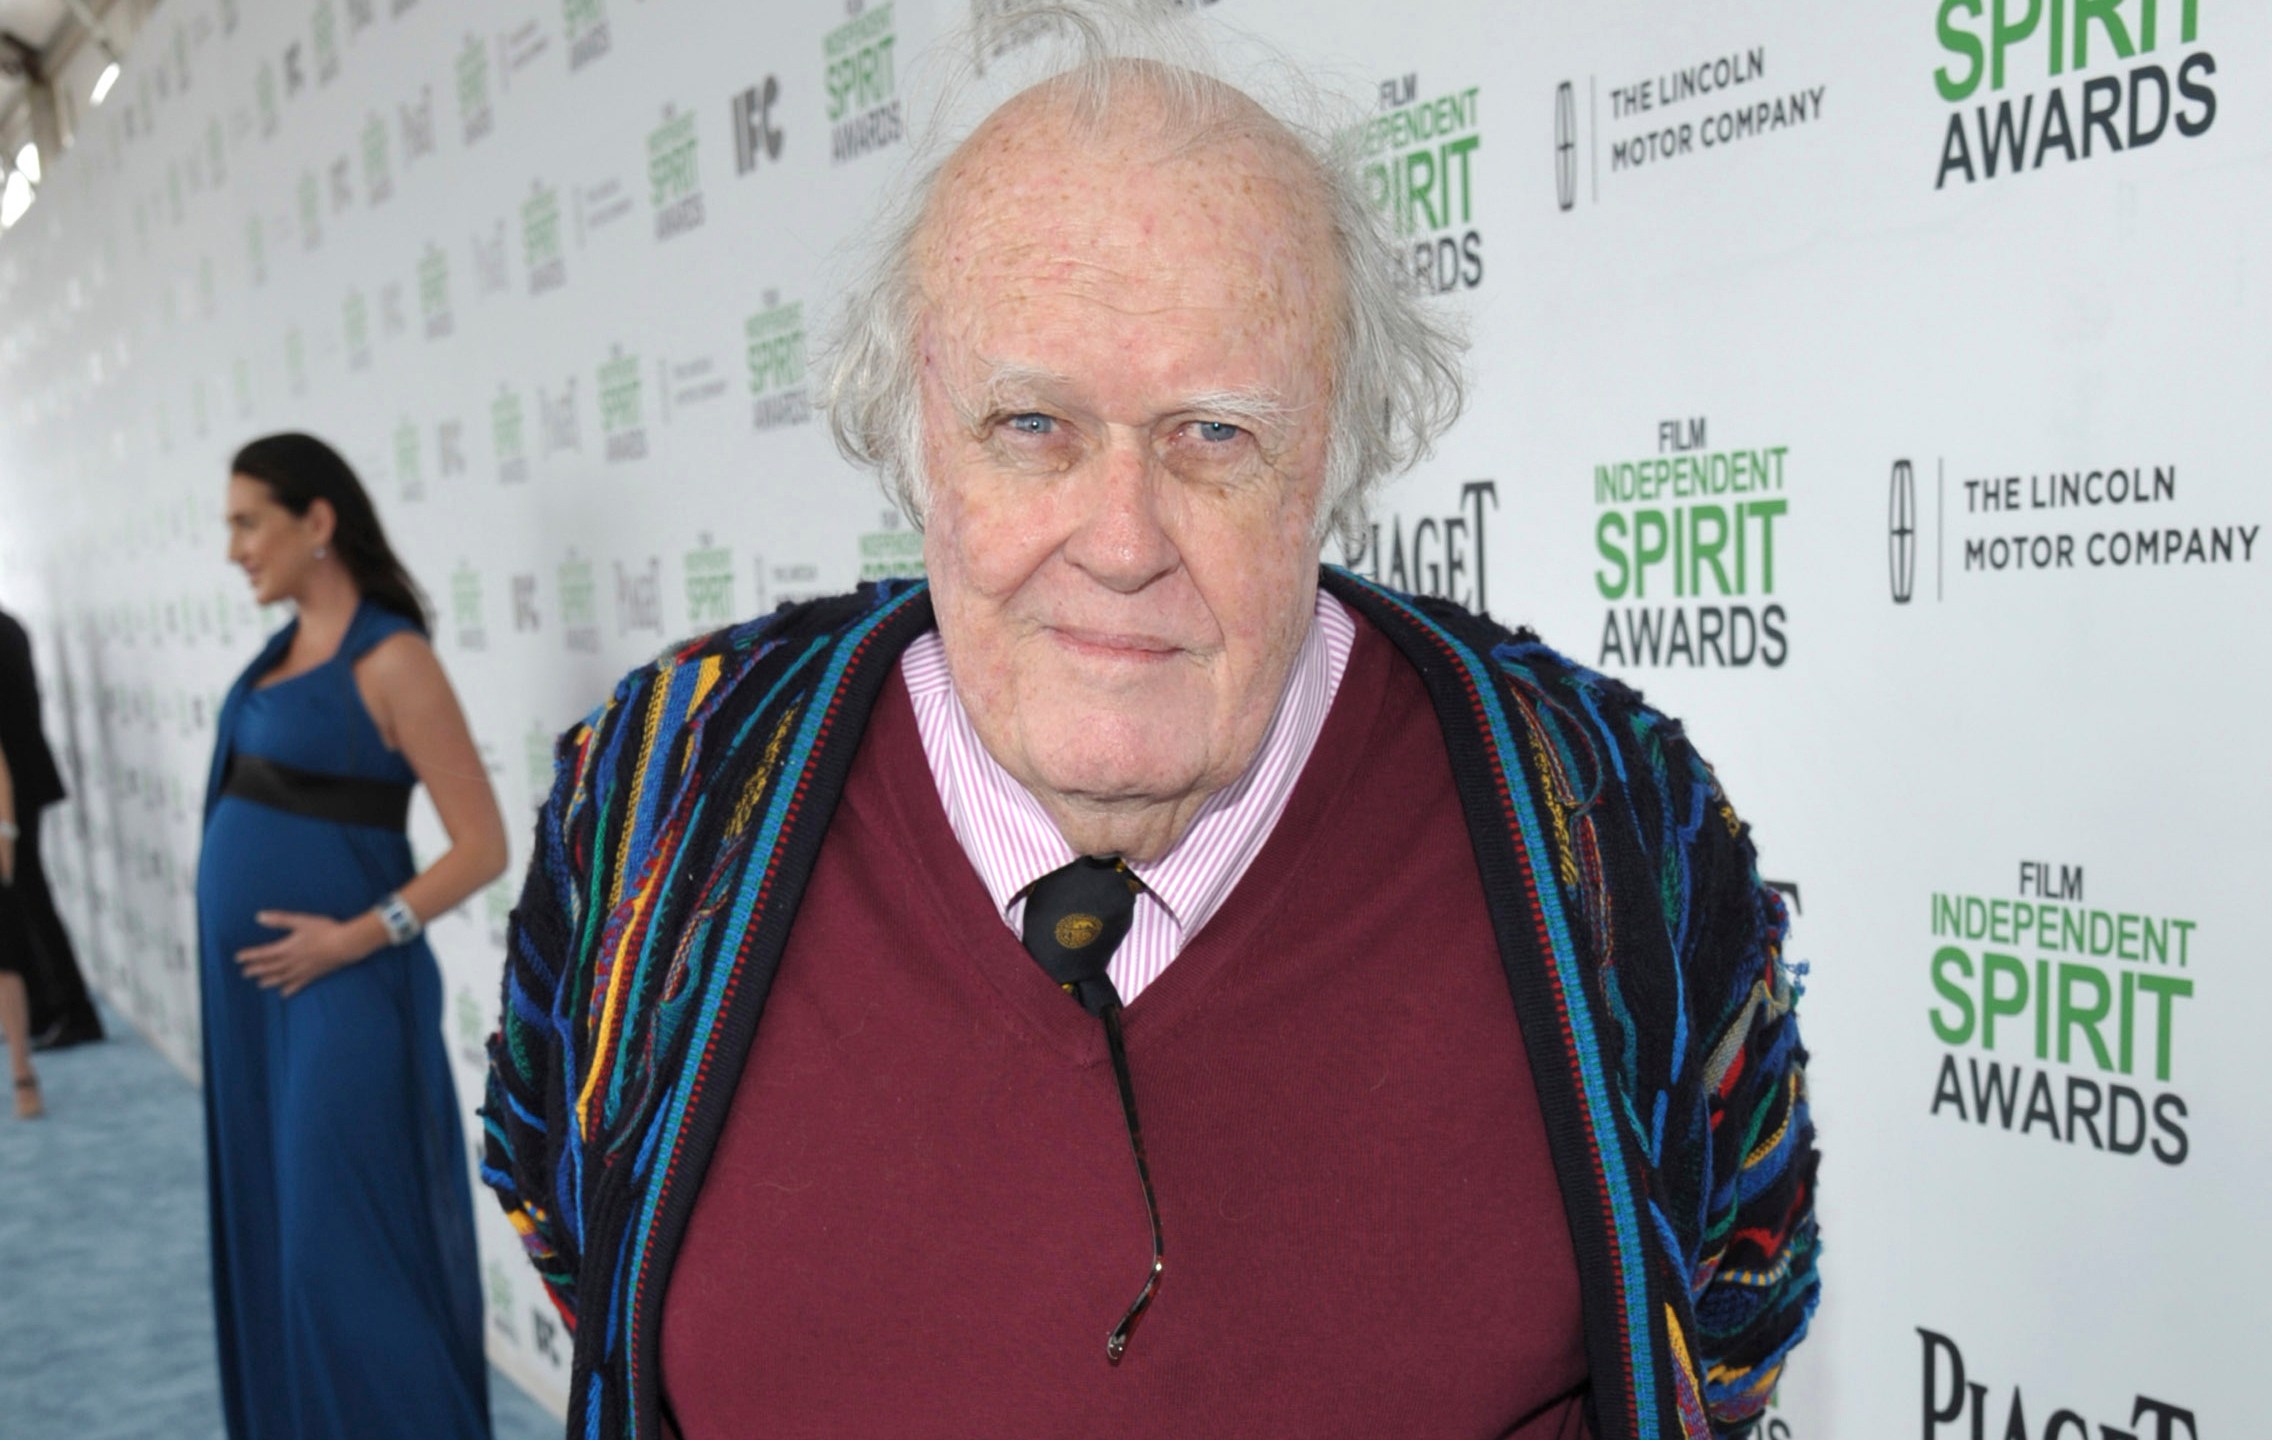 FILE - M. Emmet Walsh arrives at the 2014 Film Independent Spirit Awards, March 1, 2014, in Santa Monica, Calif. Walsh, the character actor who brought his unmistakable face and unsettling presence to films including “Blood Simple” and “Blade Runner,” died Tuesday, March 19, 2024, at age 88, his manager said Wednesday. (Photo by John Shearer/Invision/AP, File)